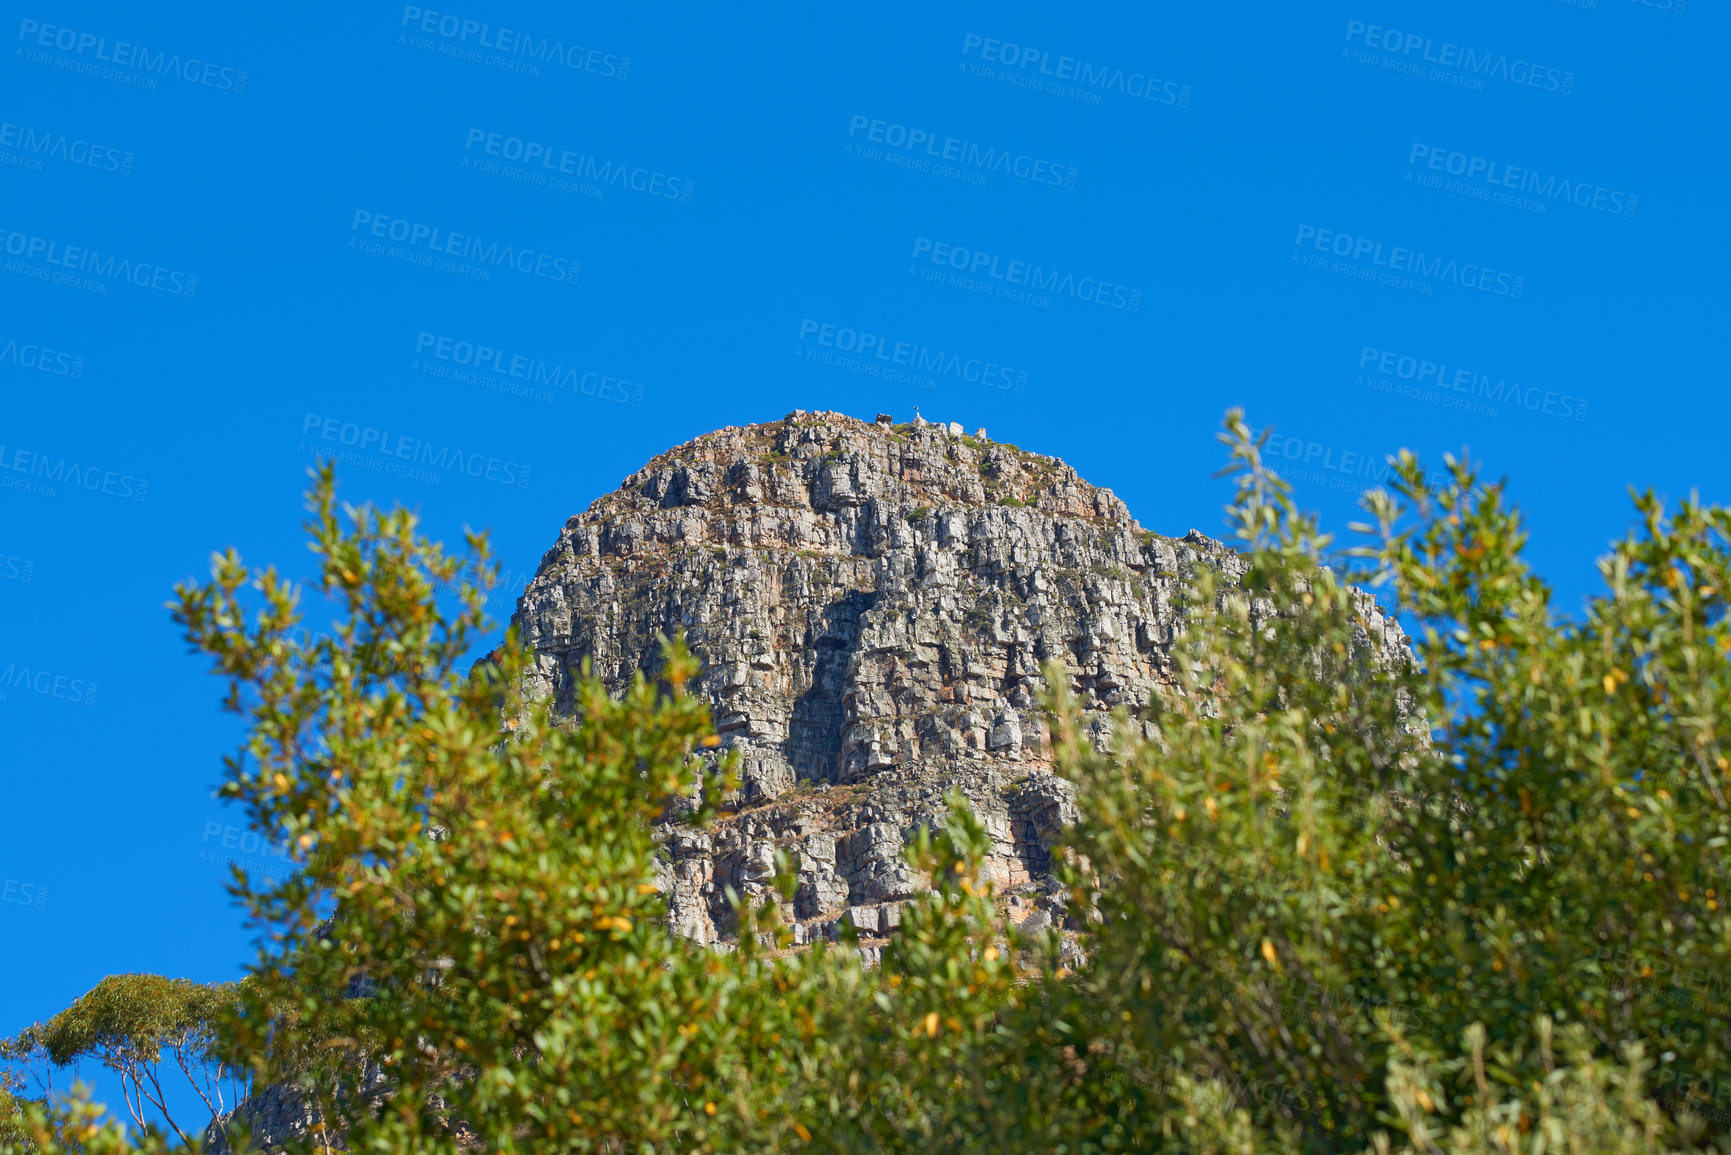 Buy stock photo Landscape view of Lions Head mountain in popular tourism or hiking destination. Rough terrain with blue sky, copy space and lush green trees or plants growing in remote, wild Cape Town, South Africa